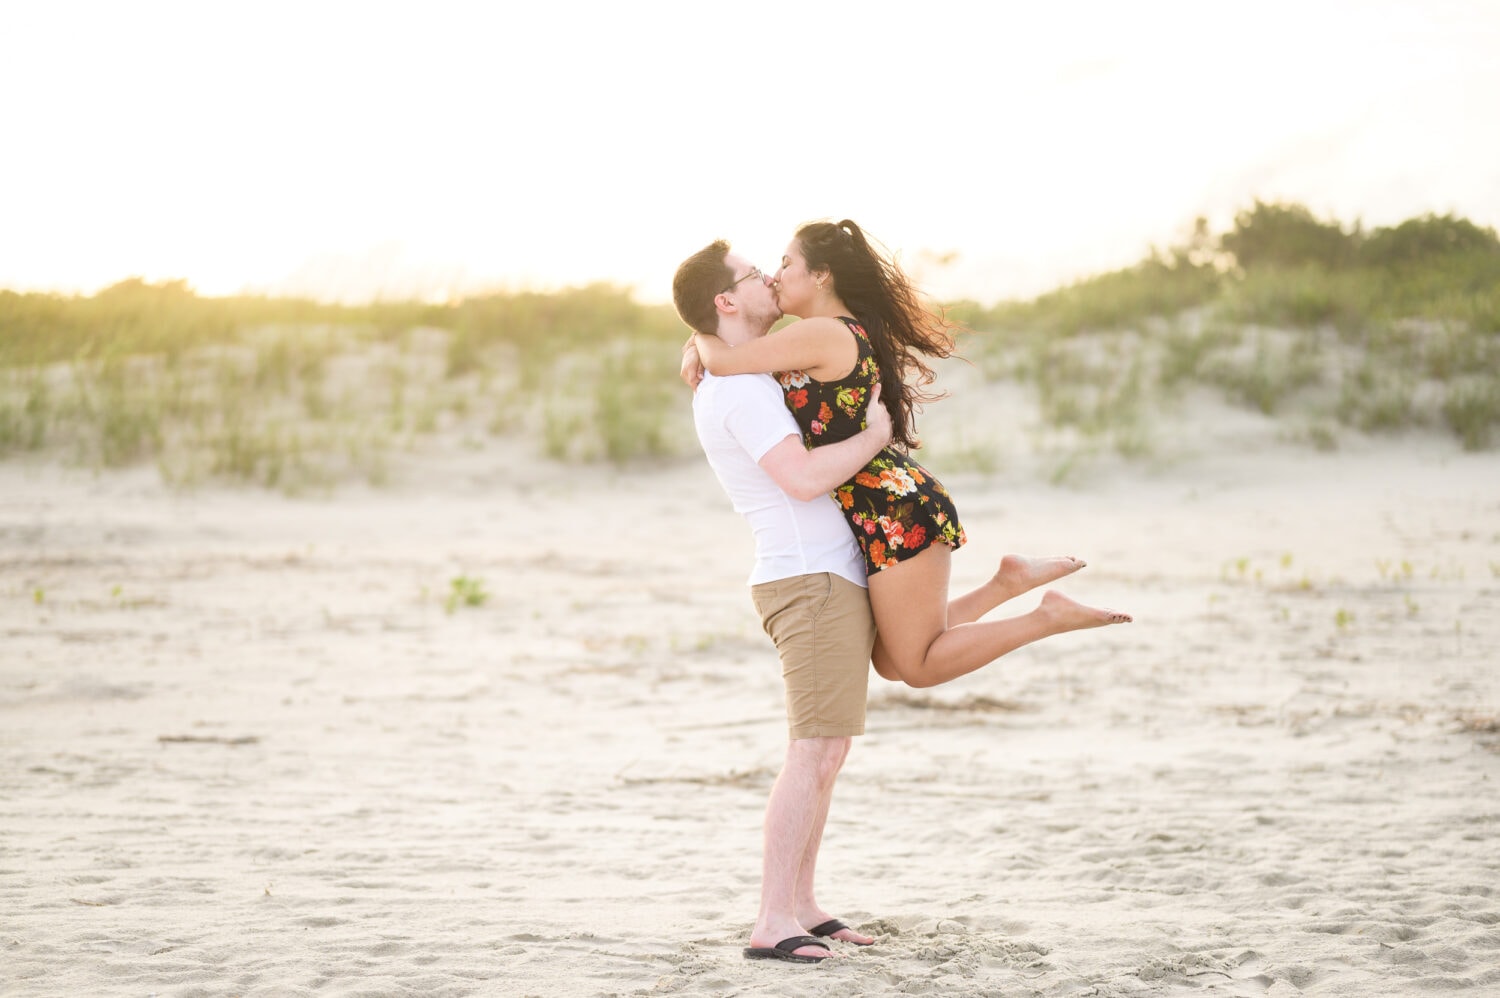 Lifting fiance into the air in the sunset - Pawleys Island